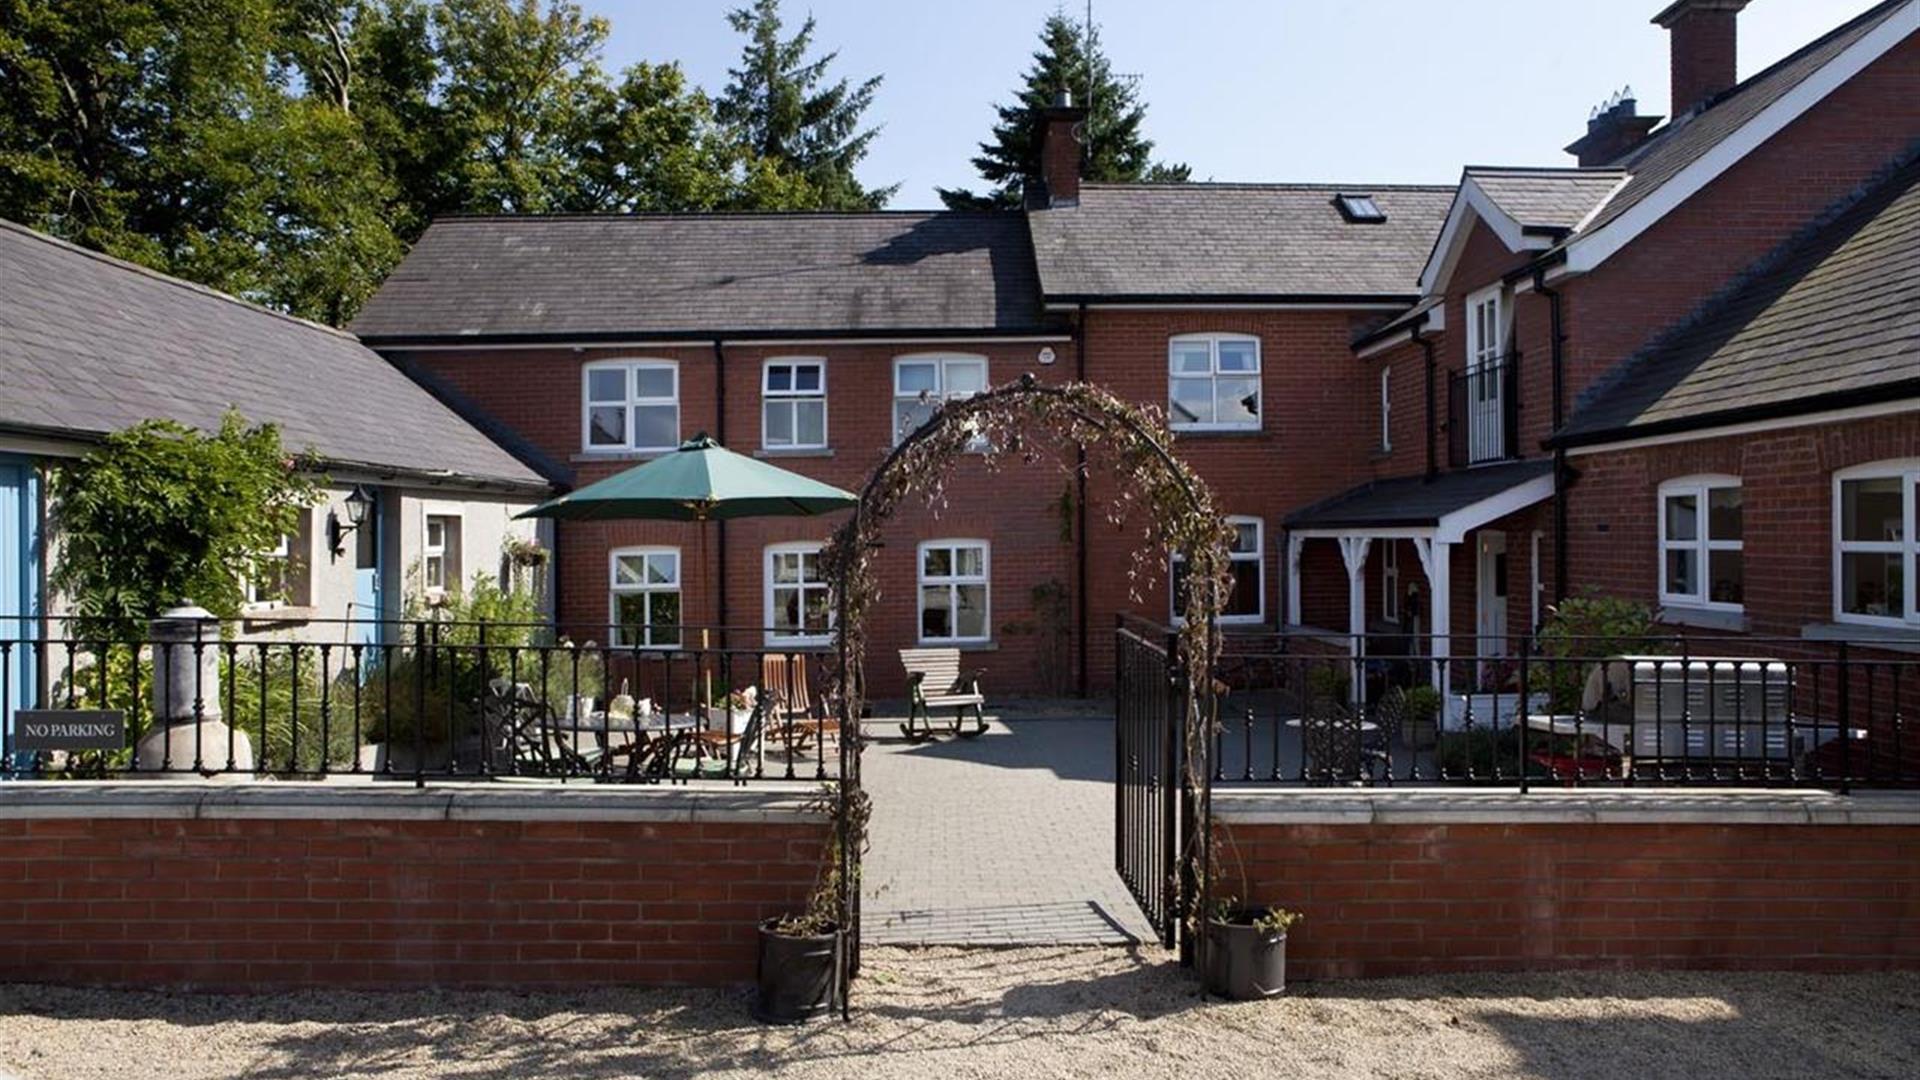 Image shows front of property with archway entrance and small courtyard with seating area